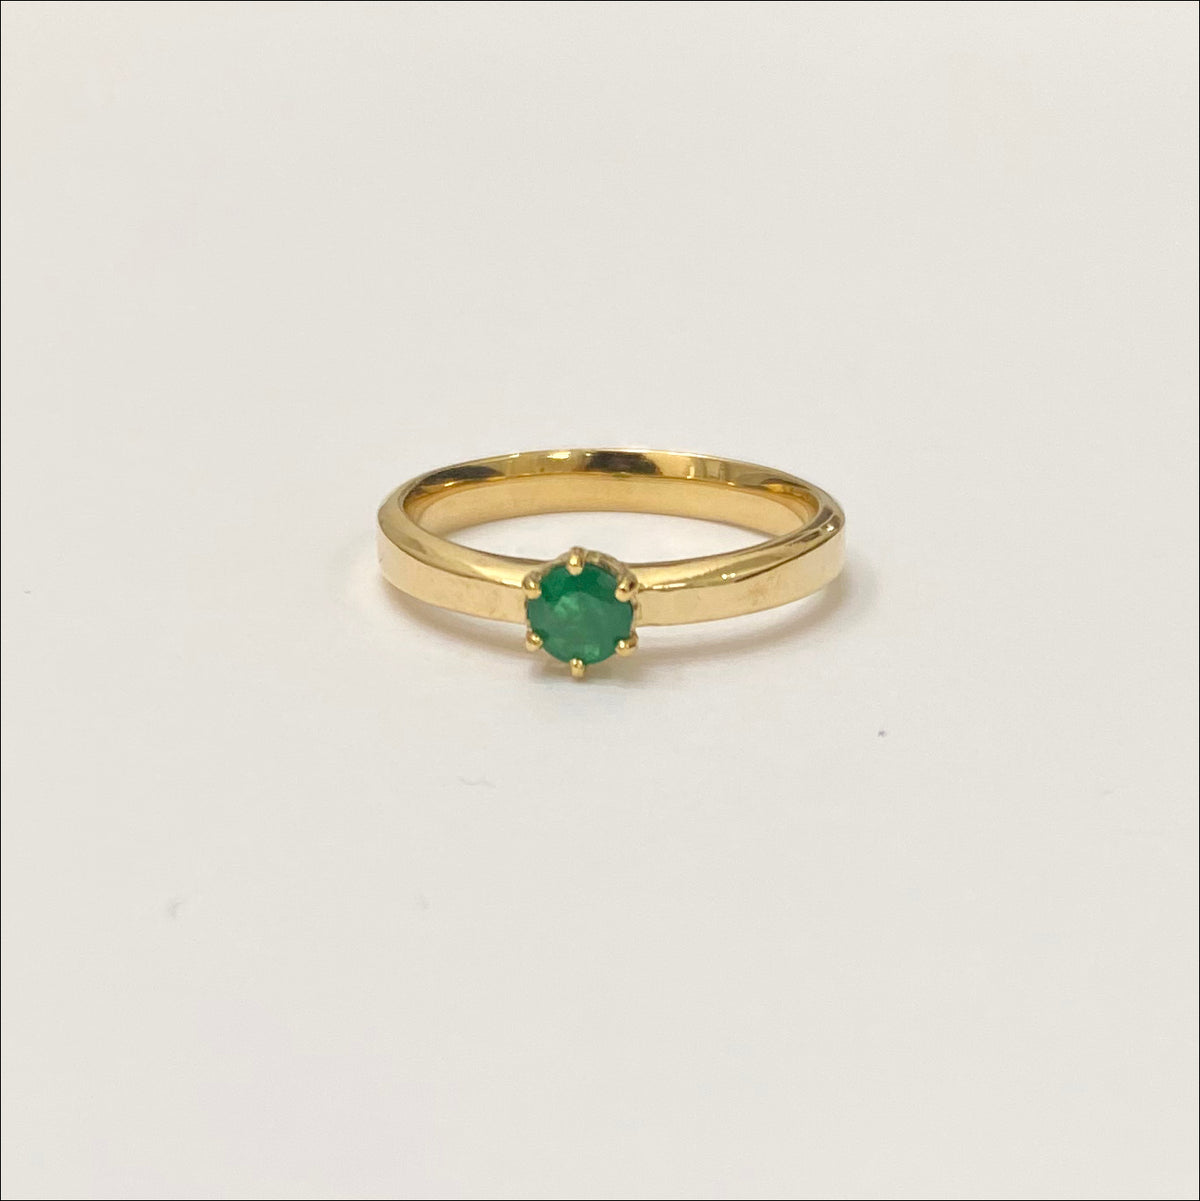 Constanza Ring - Solid Gold